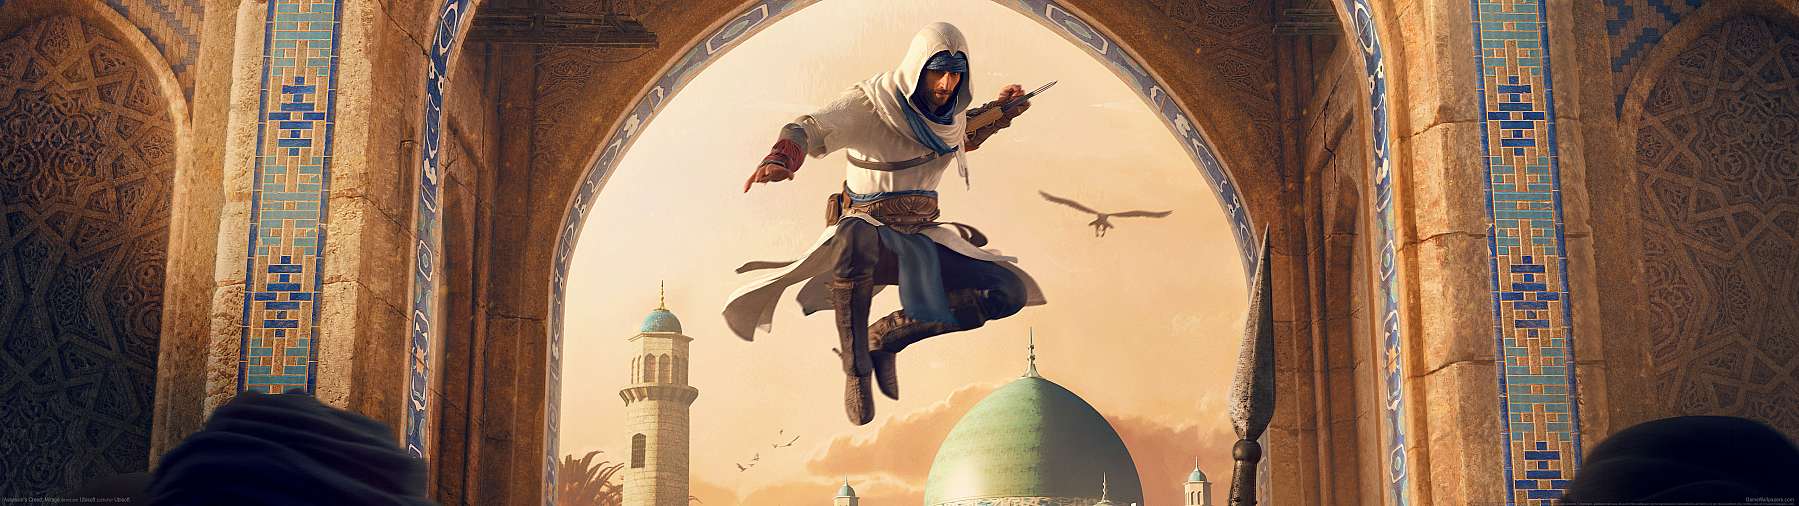 Assassin's Creed: Mirage superwide wallpaper or background 01